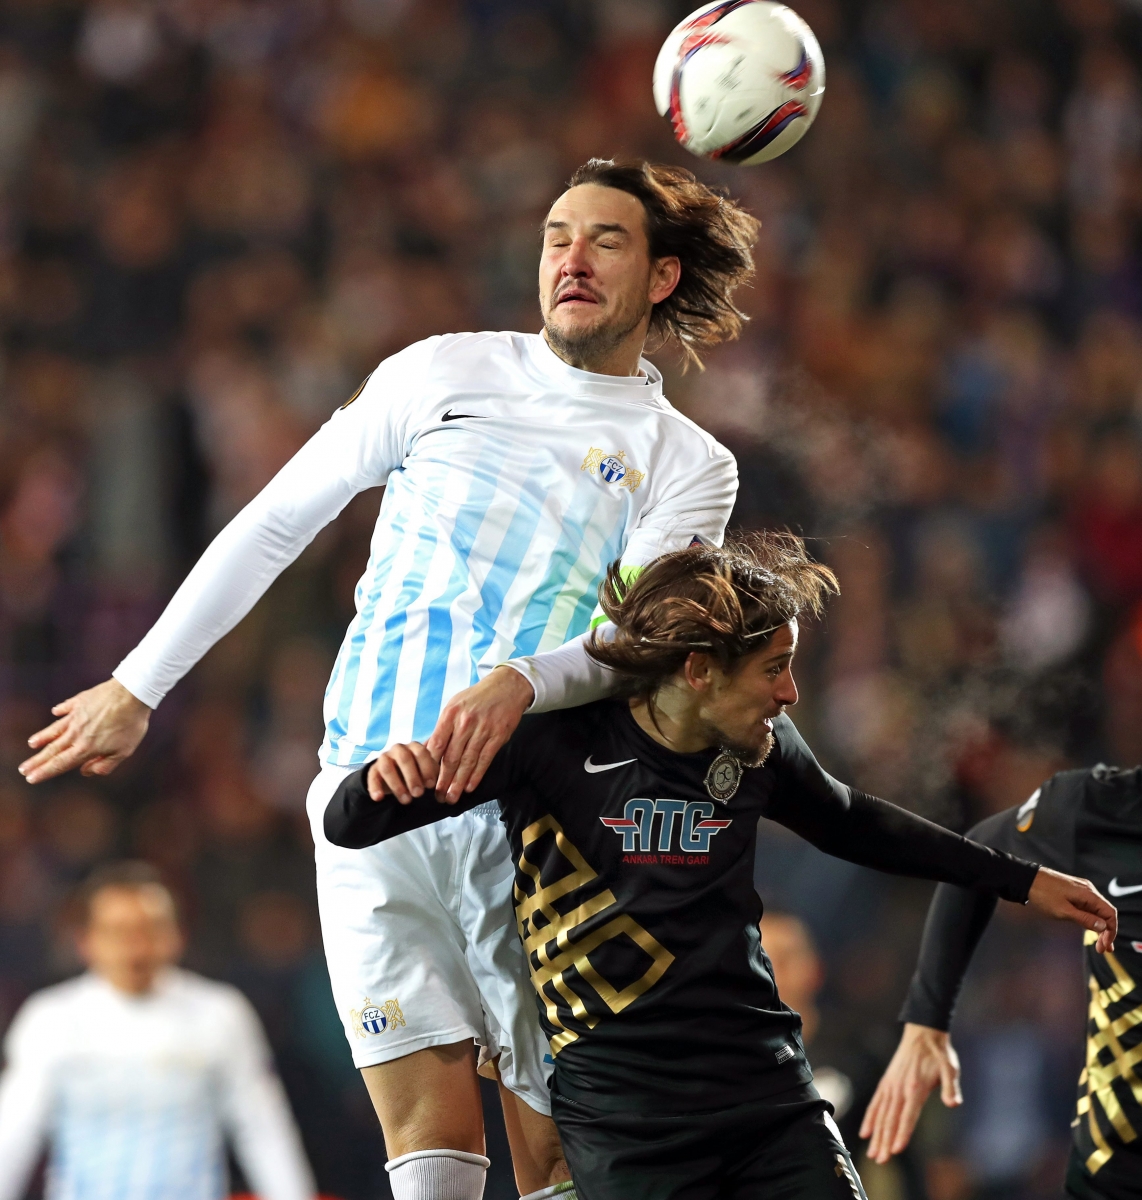 epa05666005 FC Zurich's Alain Nef (L) in action against Osmanlispor's Tiago Pinto (R) during the UEFA Europa League group L soccer match between Osmanlispor and FC Zurich in Ankara, Turkey, 08 December 2016.  EPA/SEDAT SUNA TURKEY SOCCER UEFA EUROPA LEAGUE